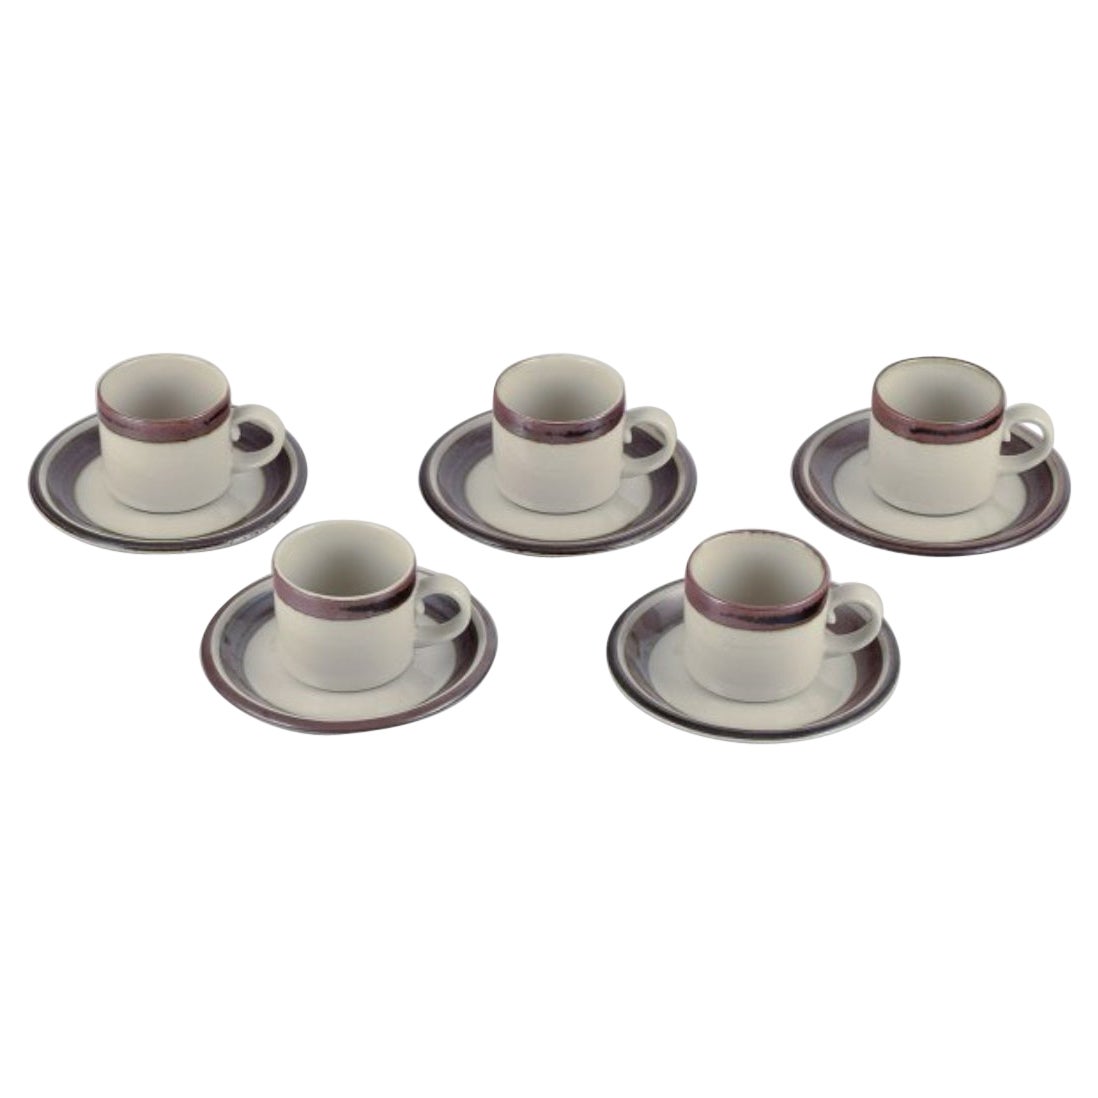 Arabia, Finland. "Karelia". Five sets of coffee cups and saucers in stoneware. 